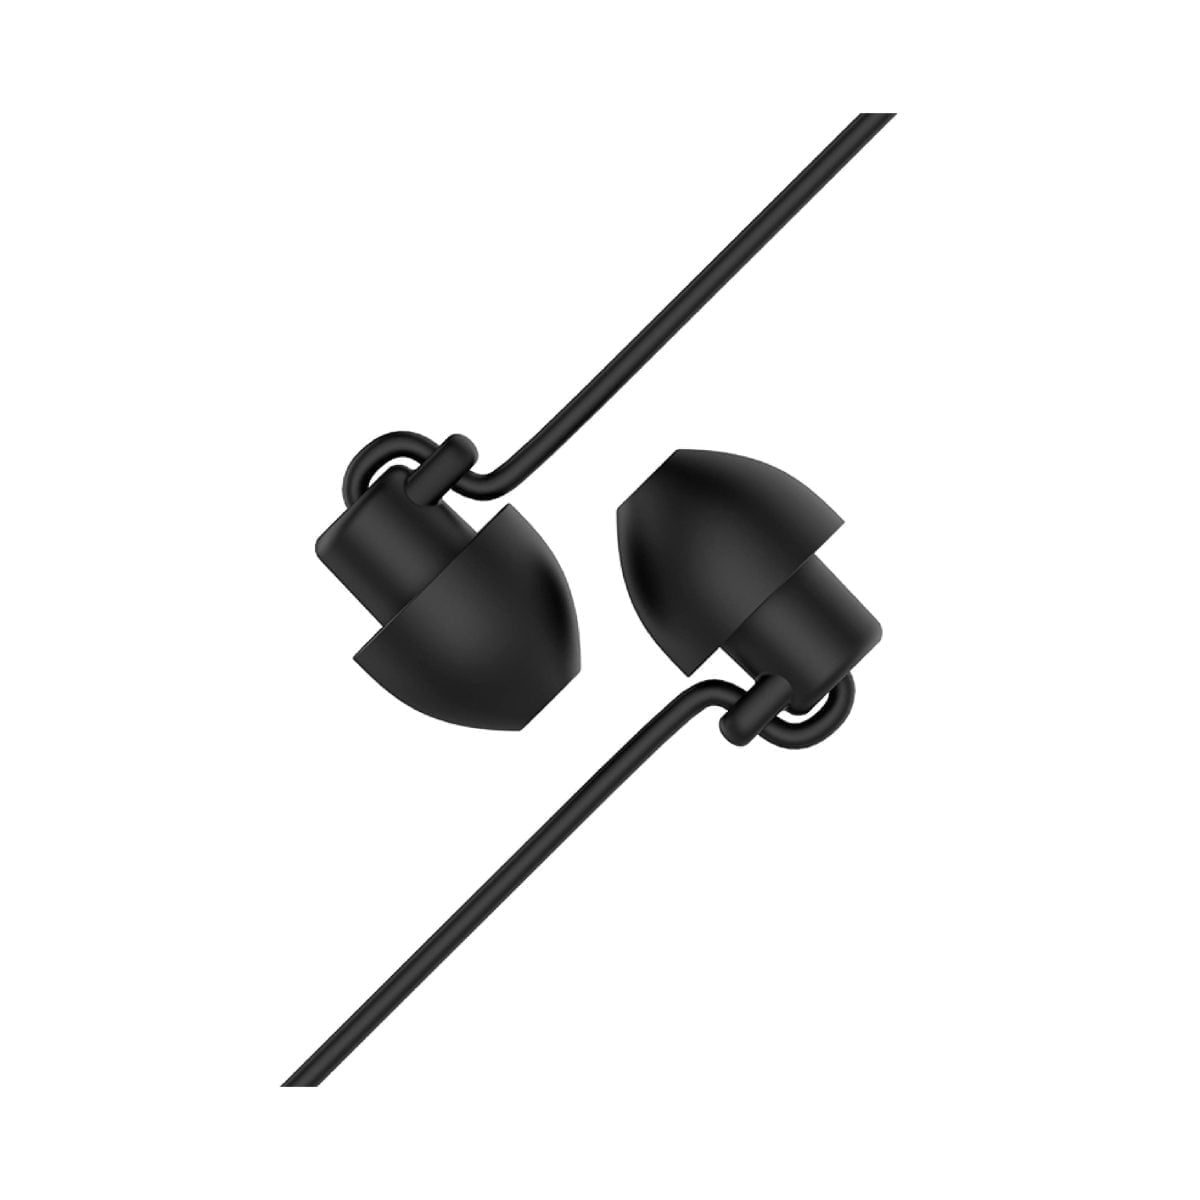 Earphone98 04 Scaled Hoco Material: Silica Gel, Tpe Enameled Wire Length: 1.2M, Weight: 10G Speaker: 6Mm Connector: 3.5Mm Microphone: With A Wheat Controller Wire Control: Single Button Control Silicone Material, Soft And Does Not Oppress The Ear, Suitable For Sleeping Silicon Sleep Earphones M56 Earphone Wired Headphones With Mic – White Silicon Sleep Earphones M56 Earphone Wired Headphones With Mic – White